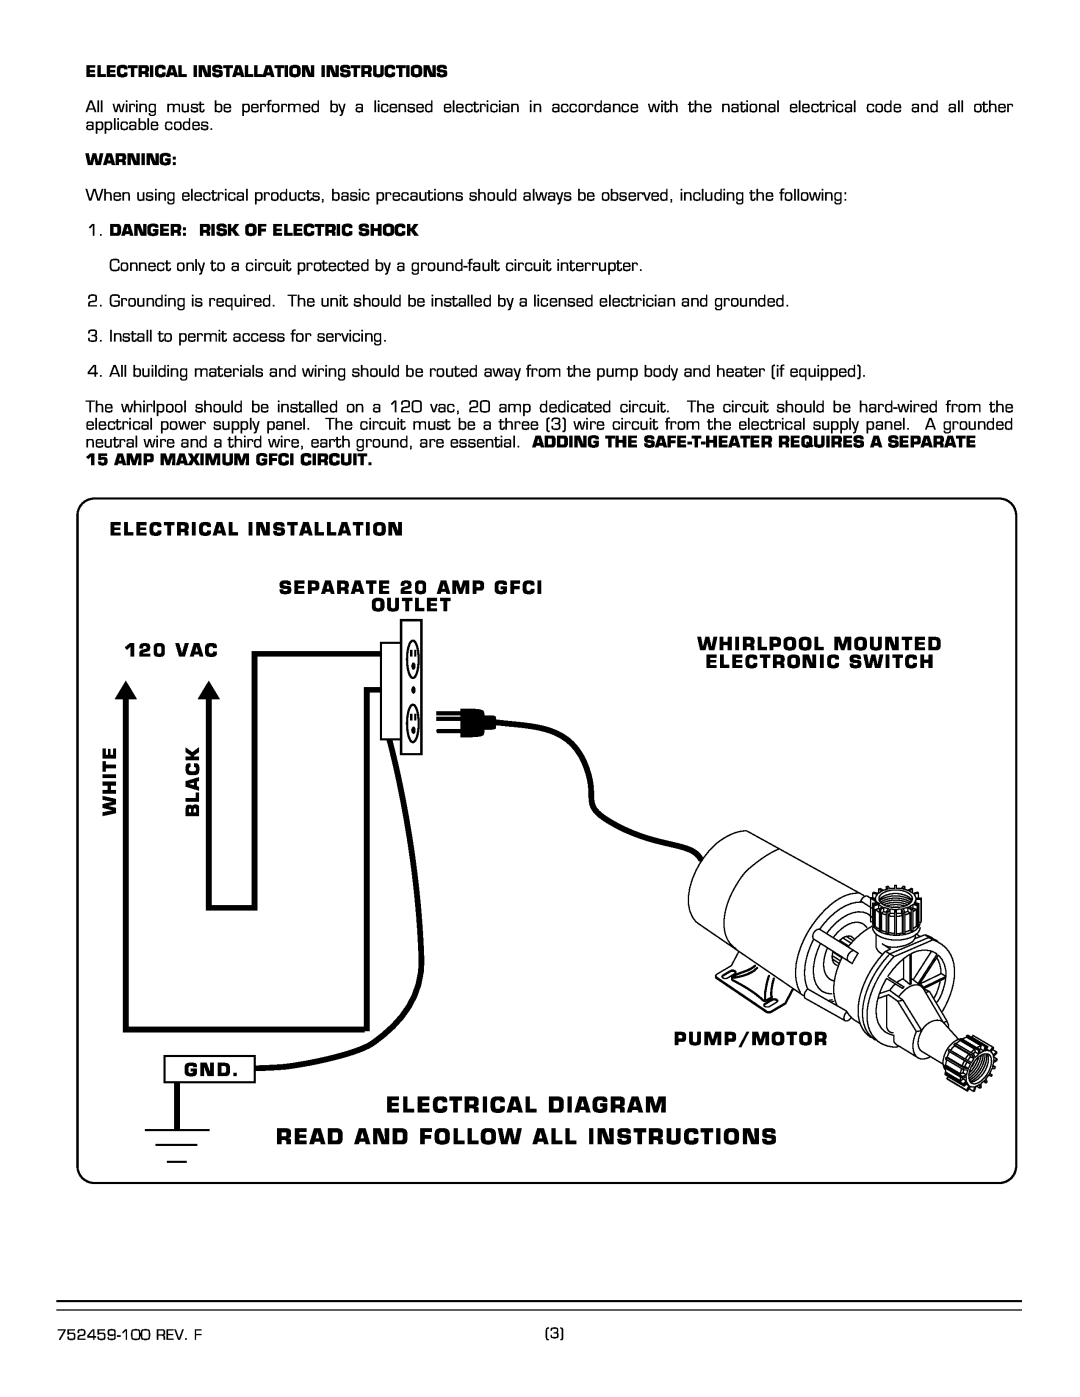 American Standard 2901.XXXW Electrical Diagram Read And Follow All Instructions, 120 VAC, White, Black 